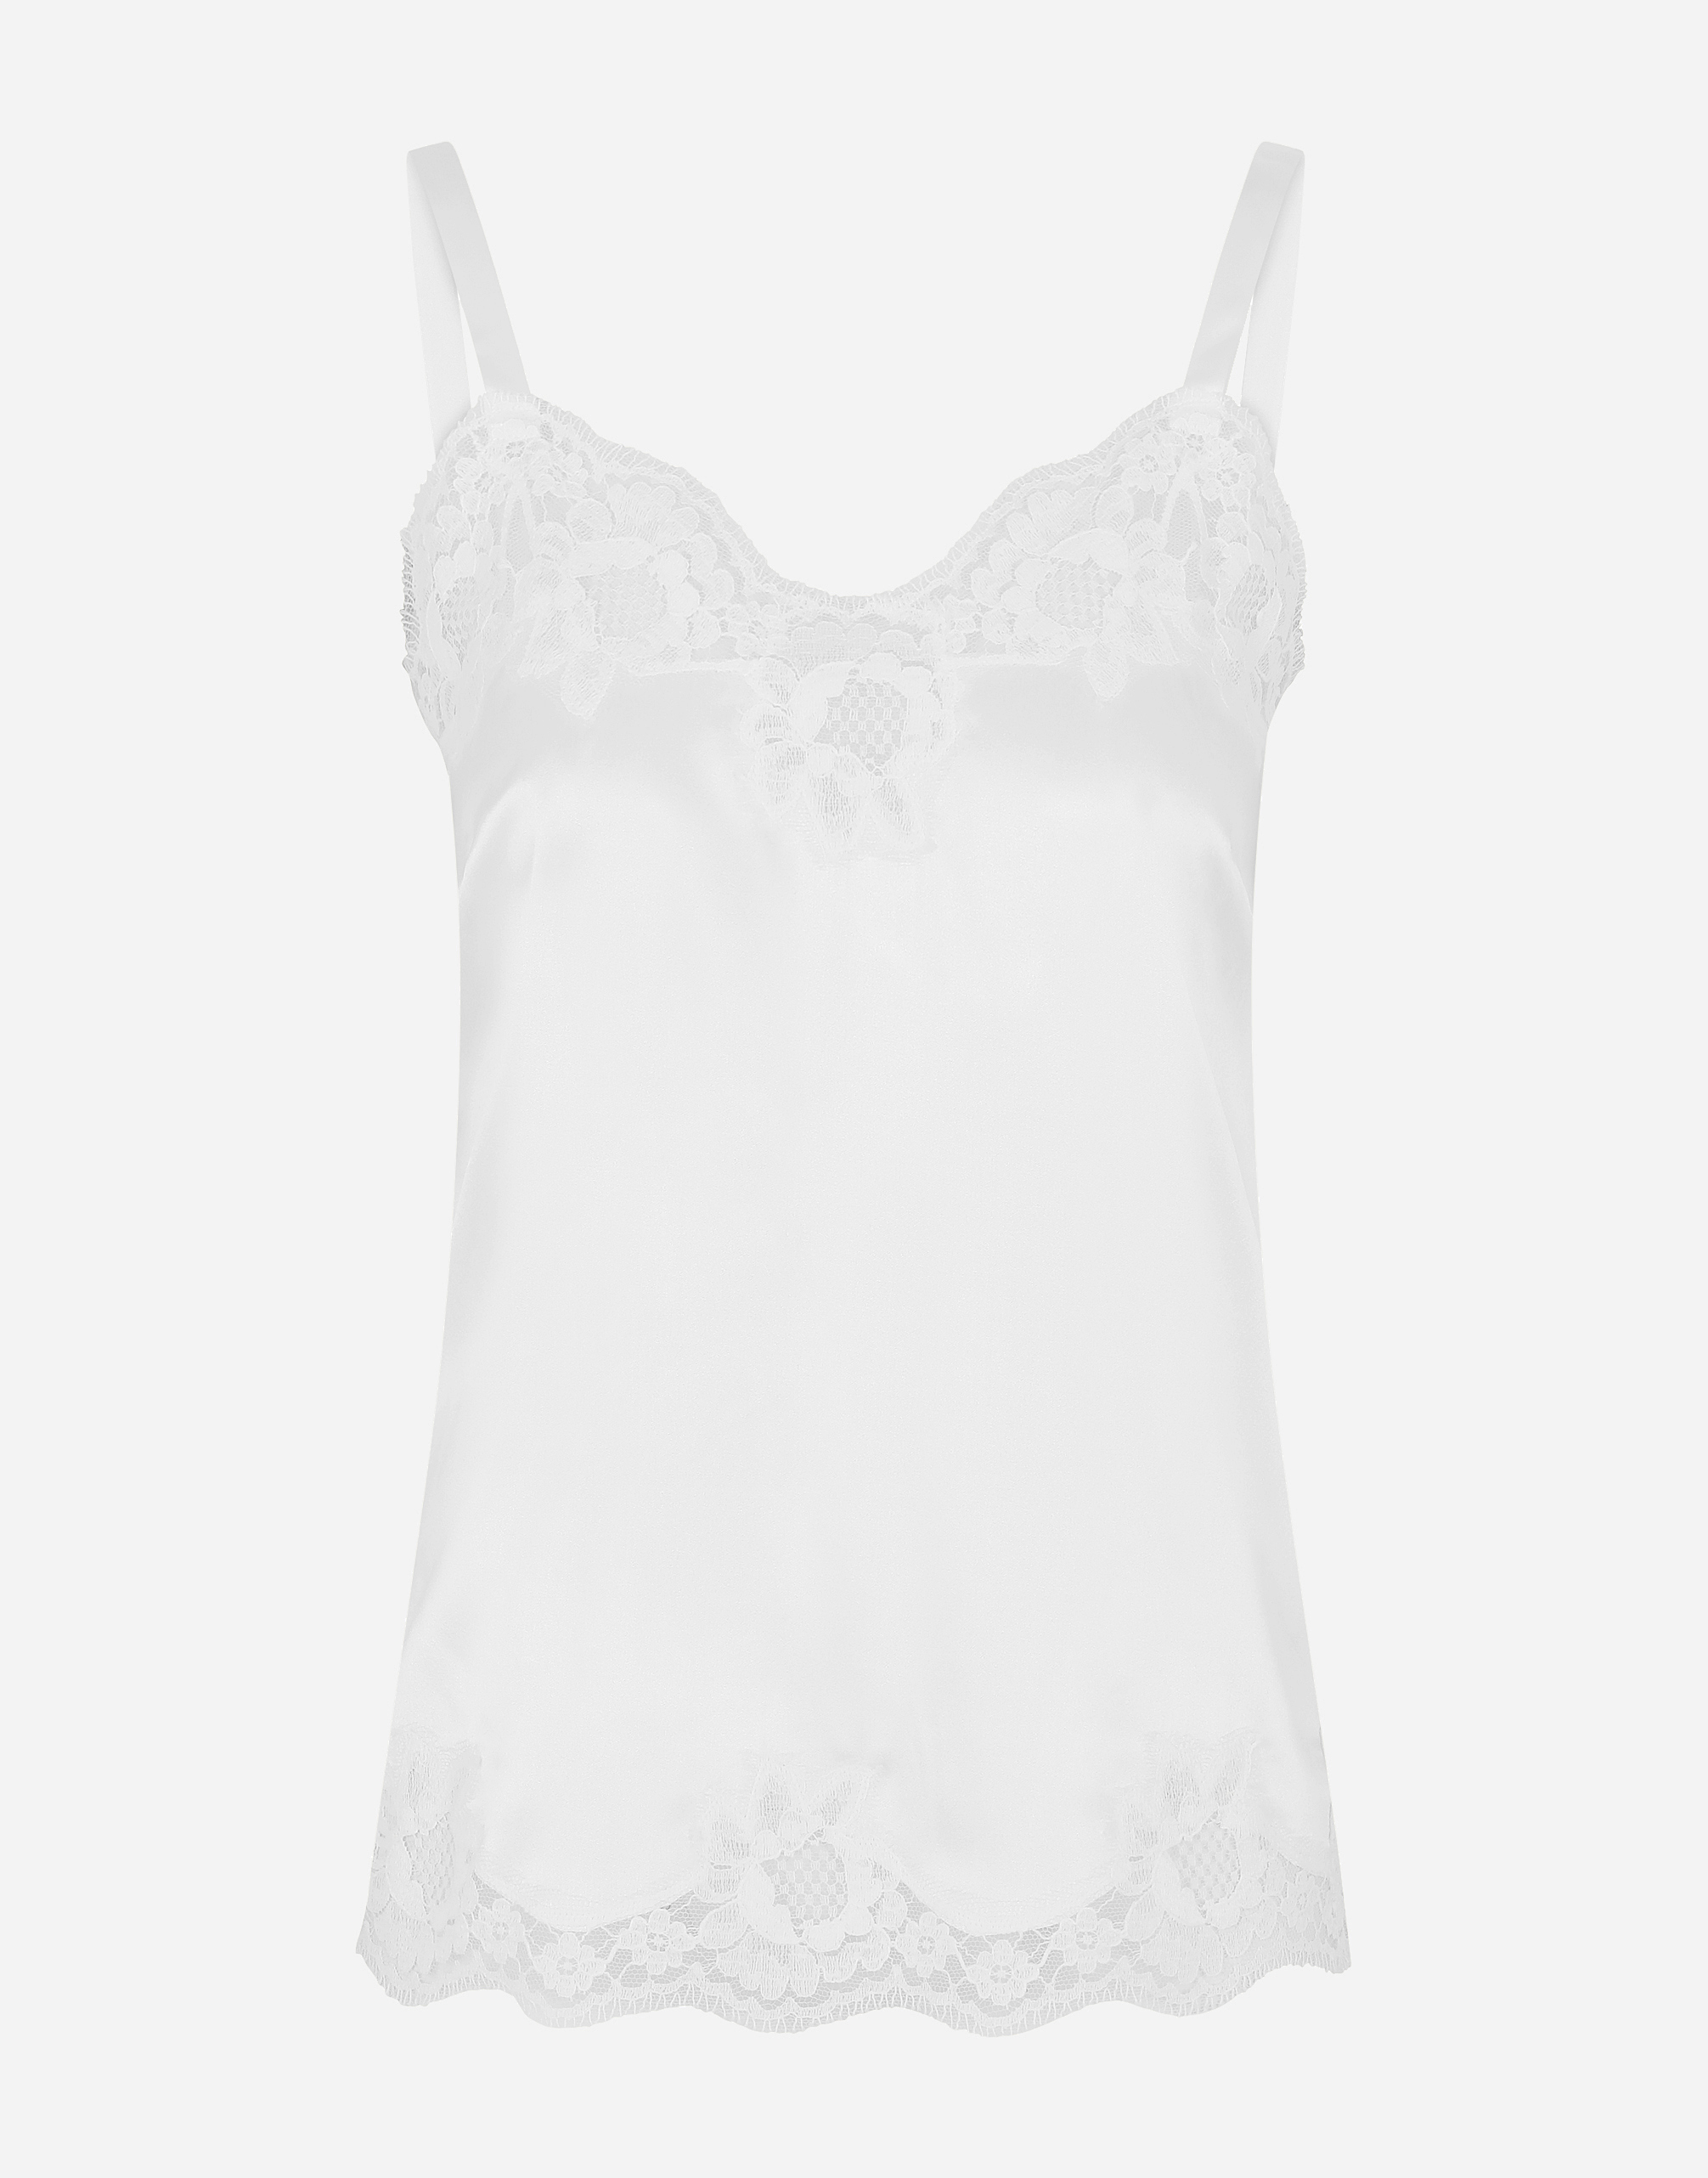 Satin lingerie-style top with lace detailing in White